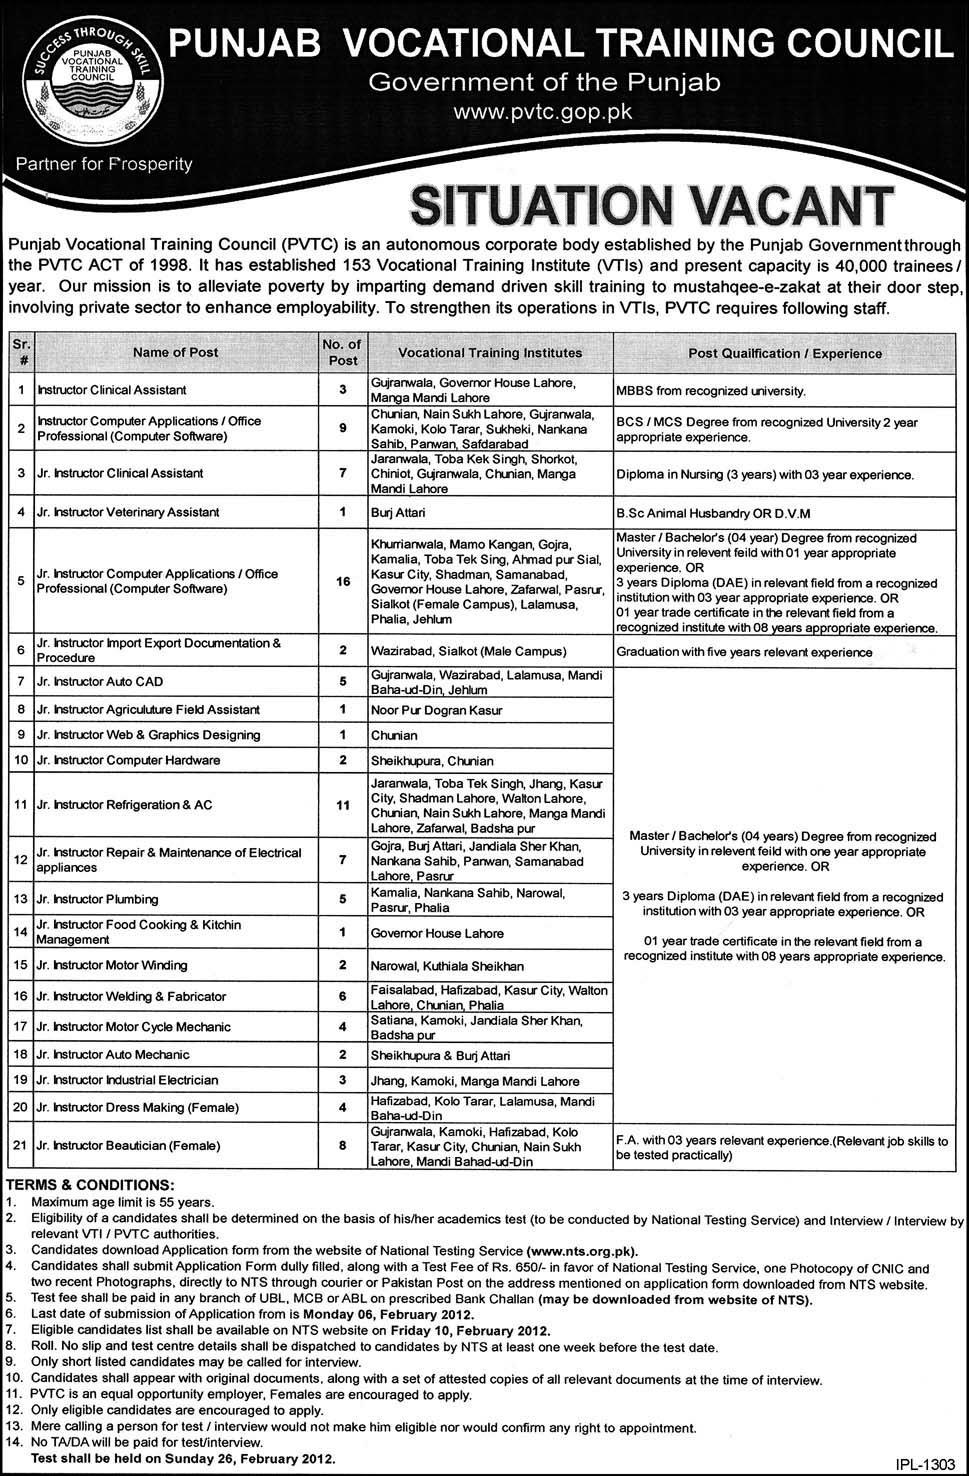 Punjab Vocational Training Council Required Jobs Opportunity